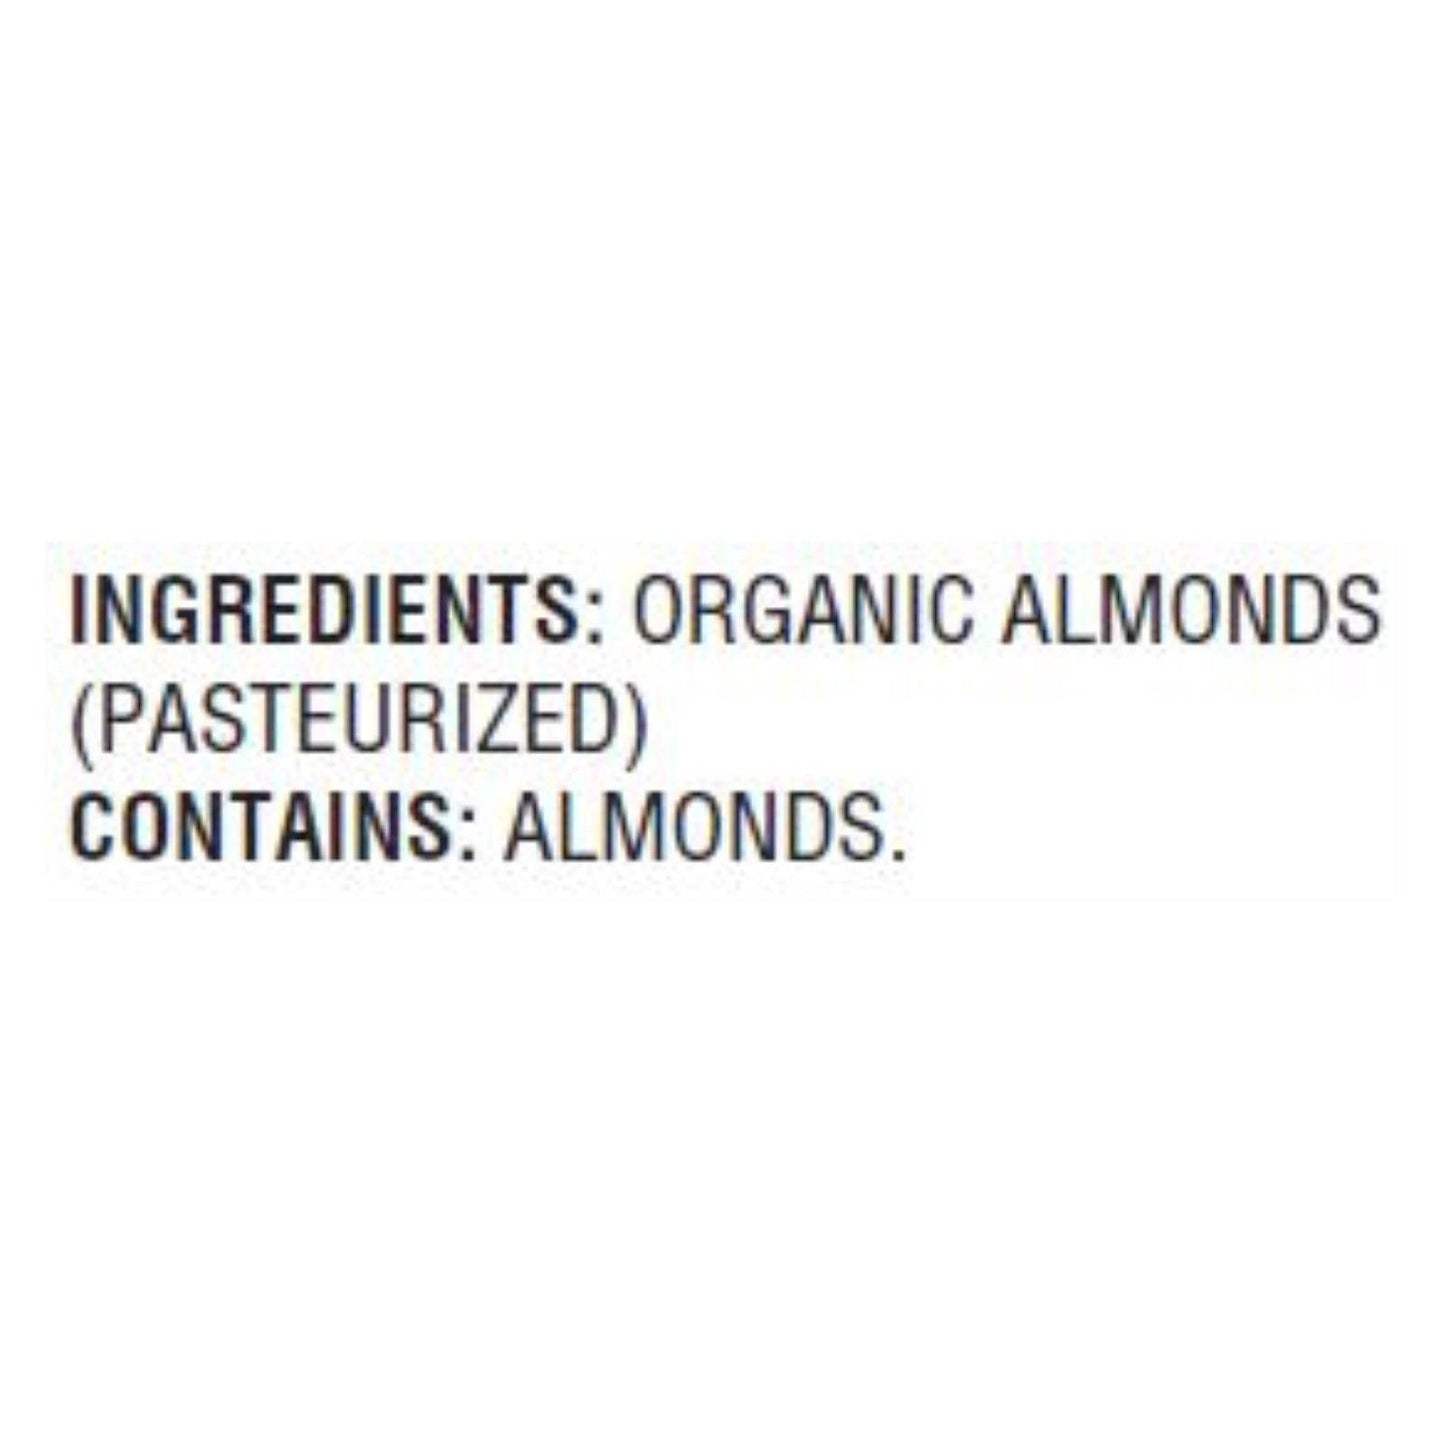 Woodstock Organic Raw Almonds - Case Of 8 - 7.5 Oz | OnlyNaturals.us